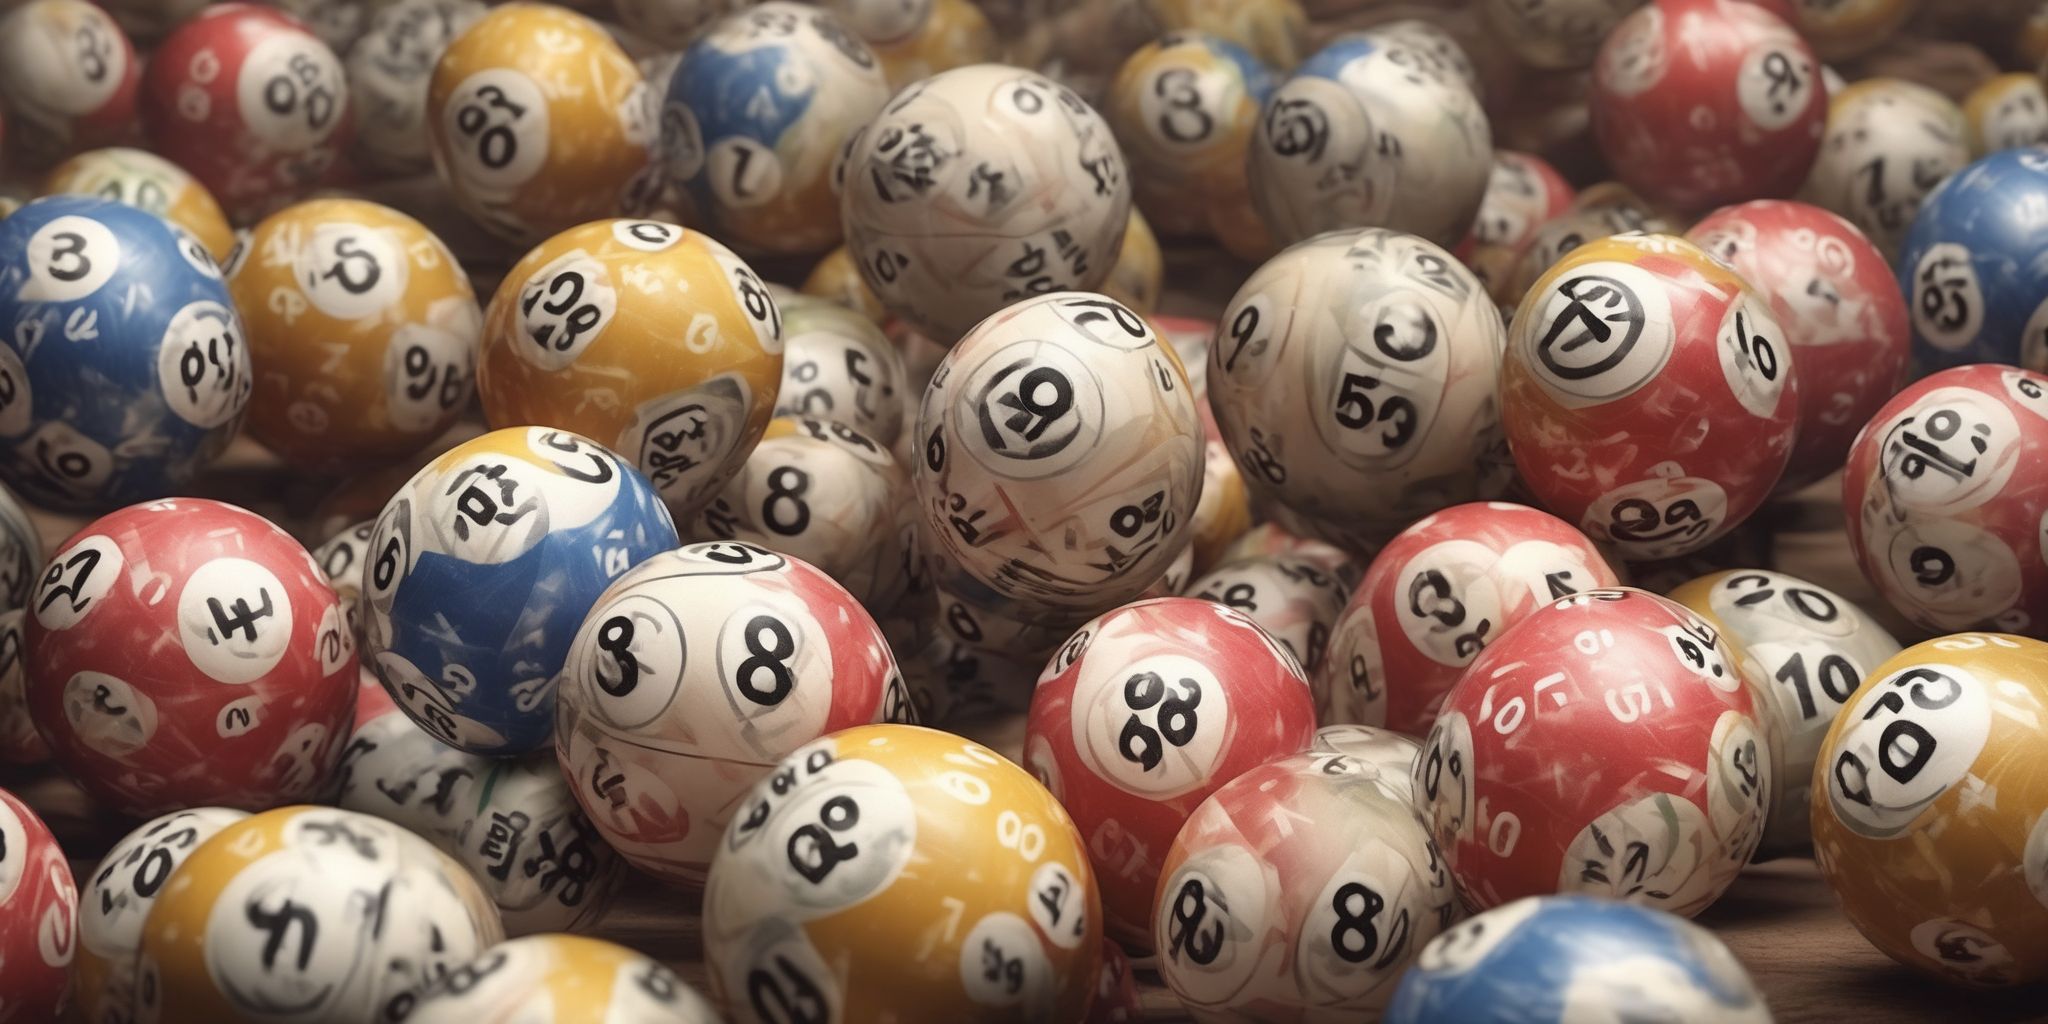 Lottery  in realistic, photographic style